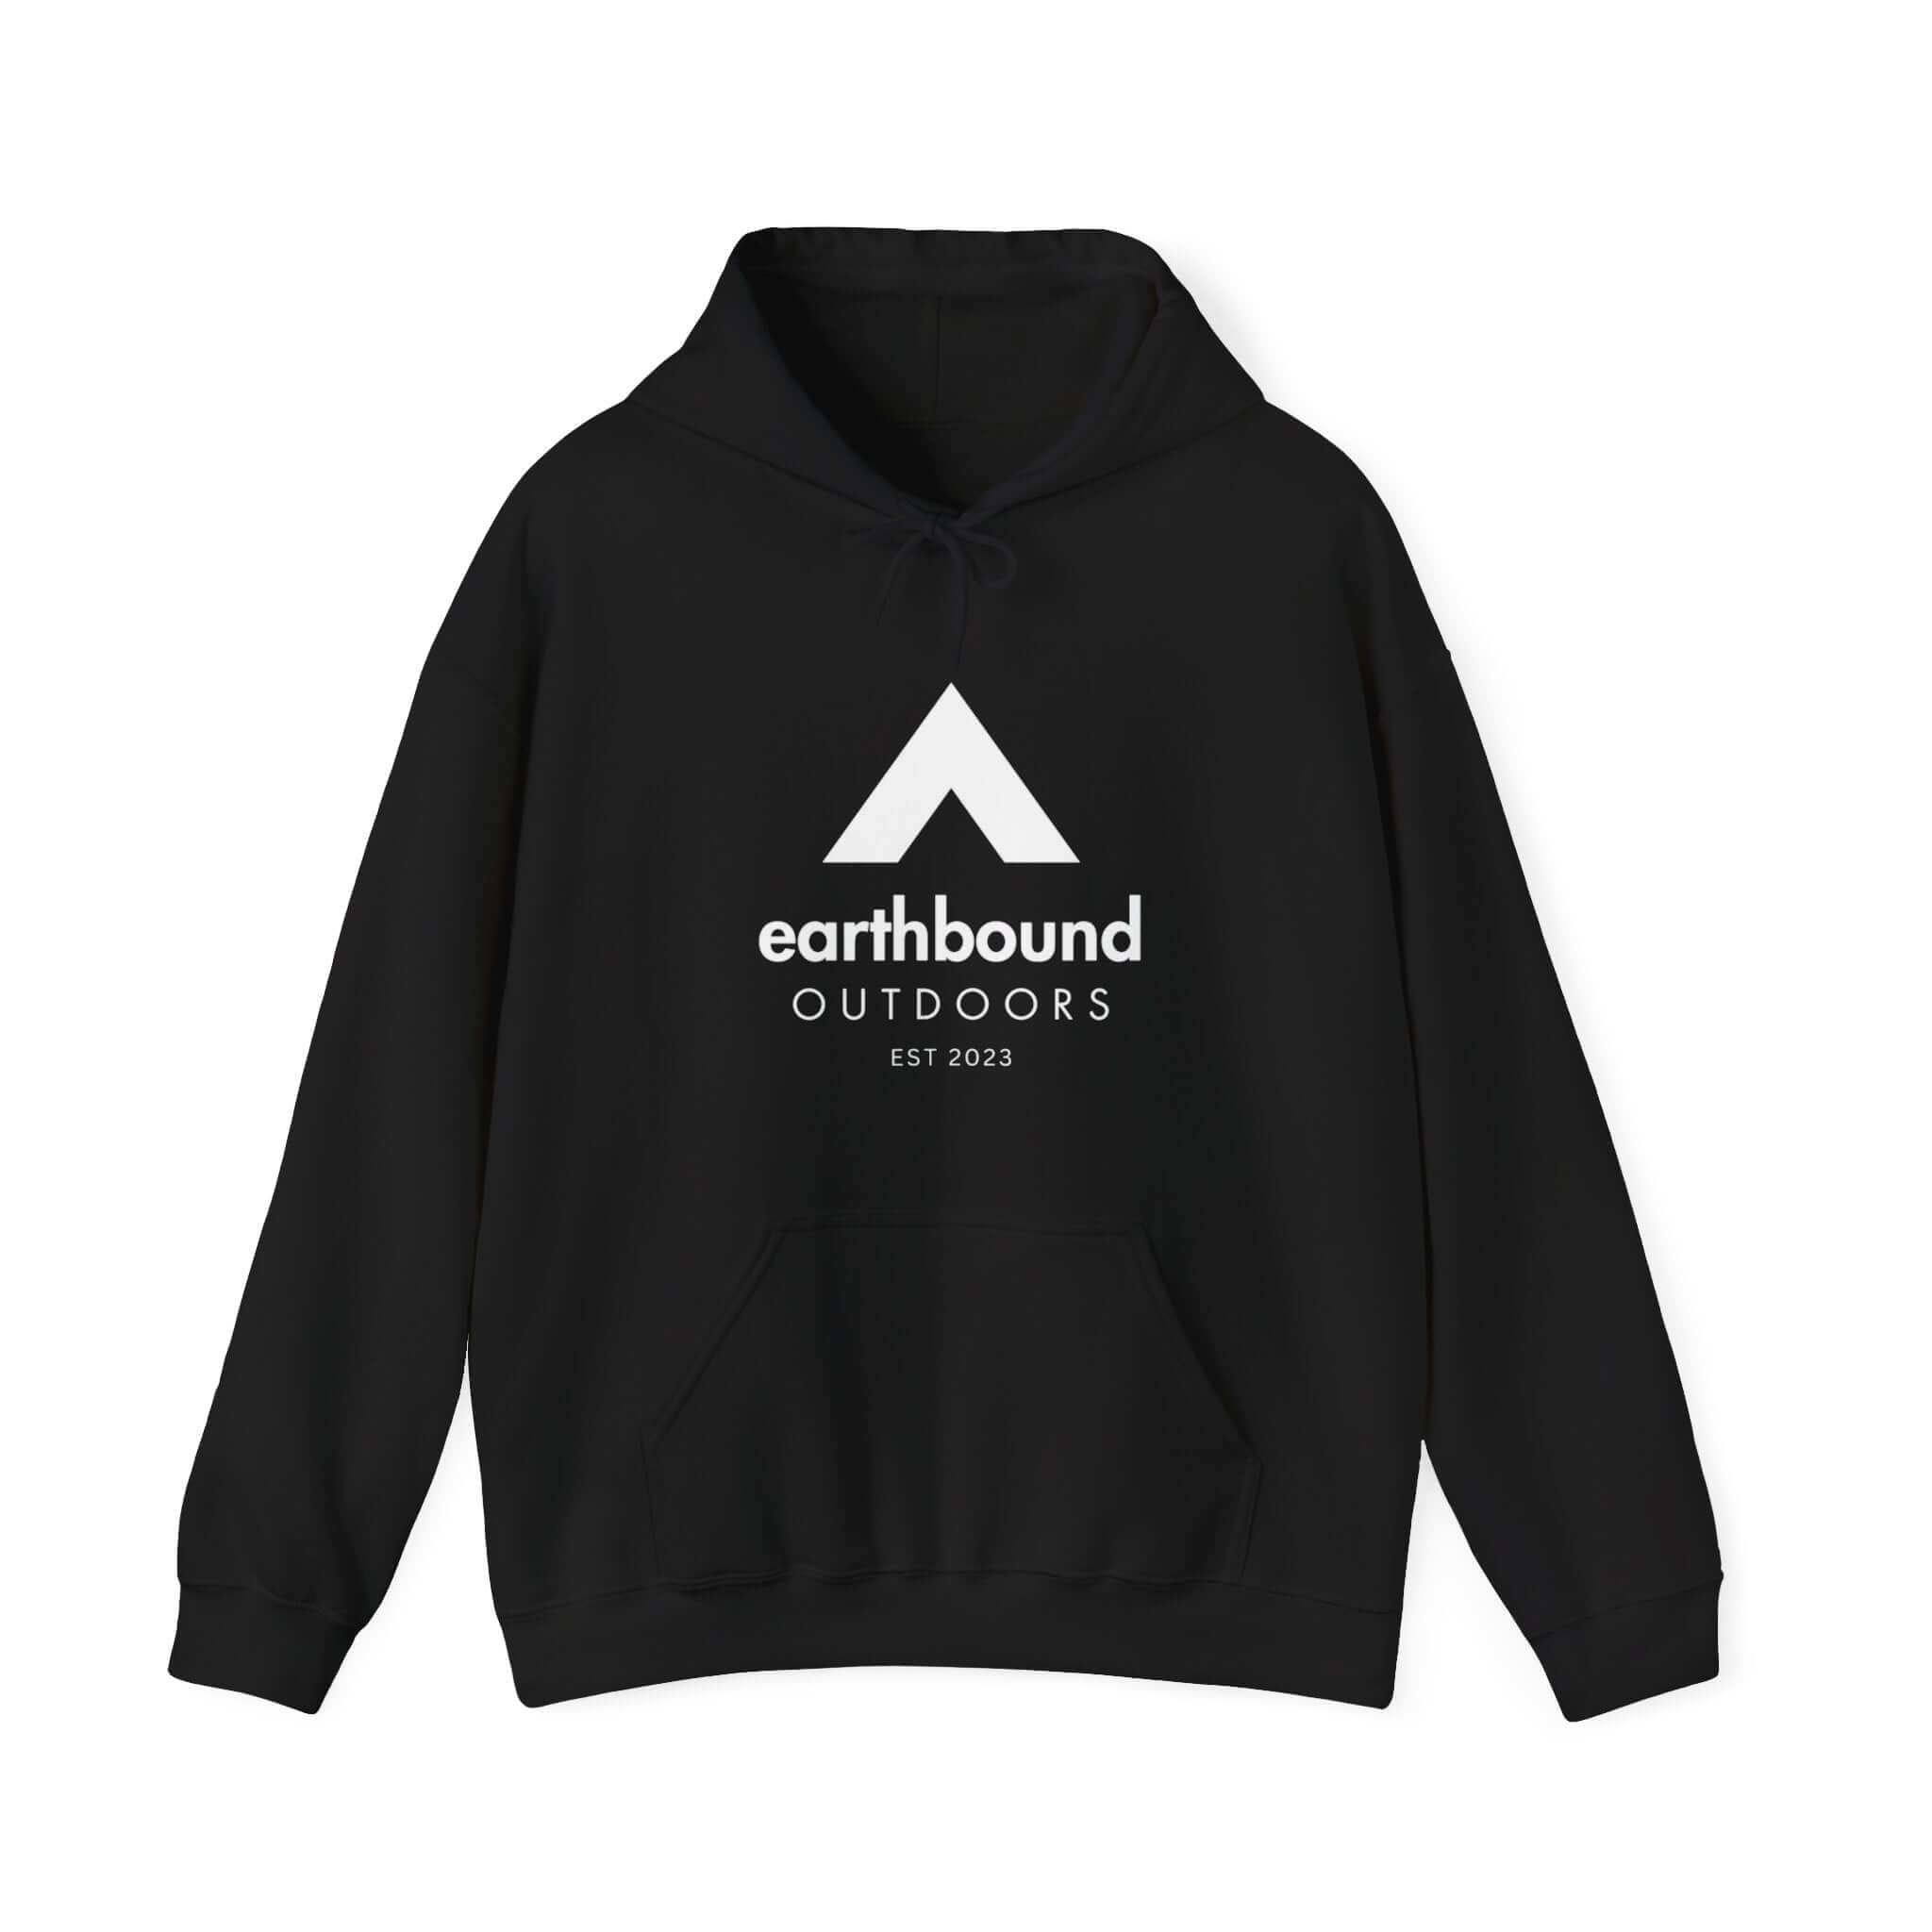 Earthbound Outdoors Unisex Heavy Blend™ Hoodie